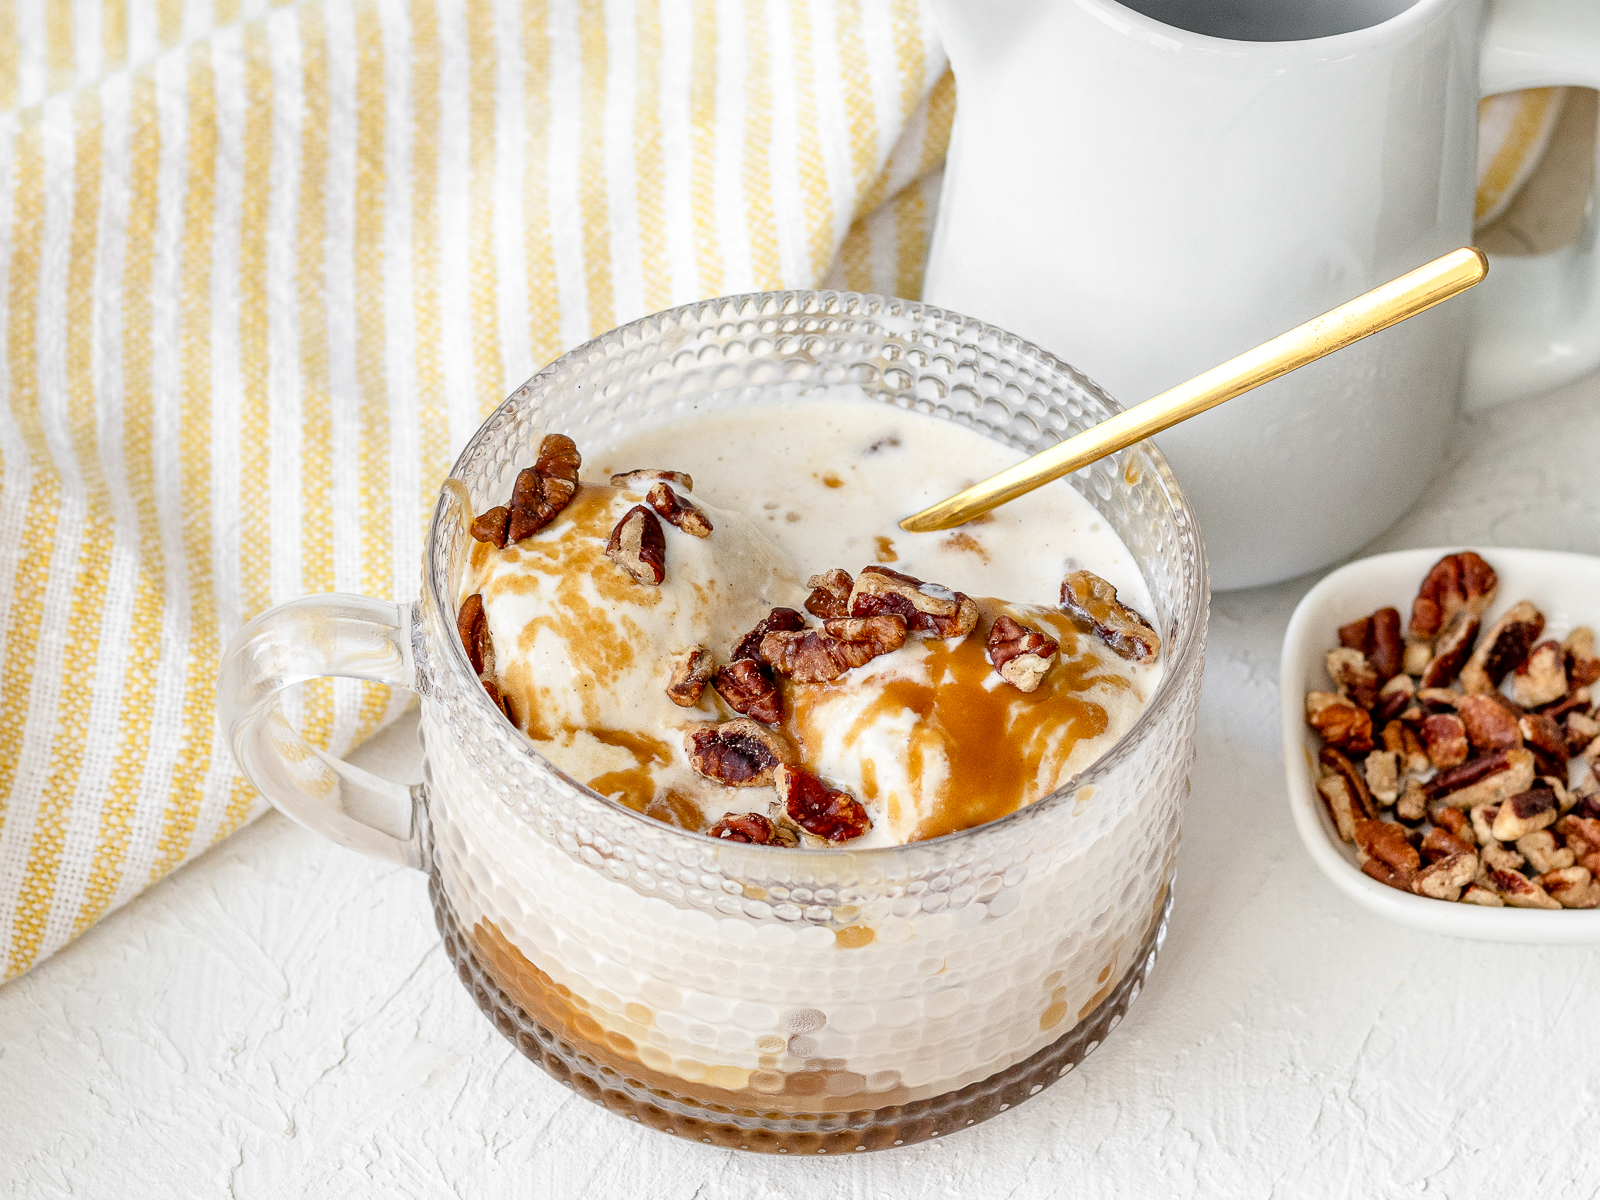 Caramel Affogato with espresso, microwave caramel sauce, and toasted pecans.